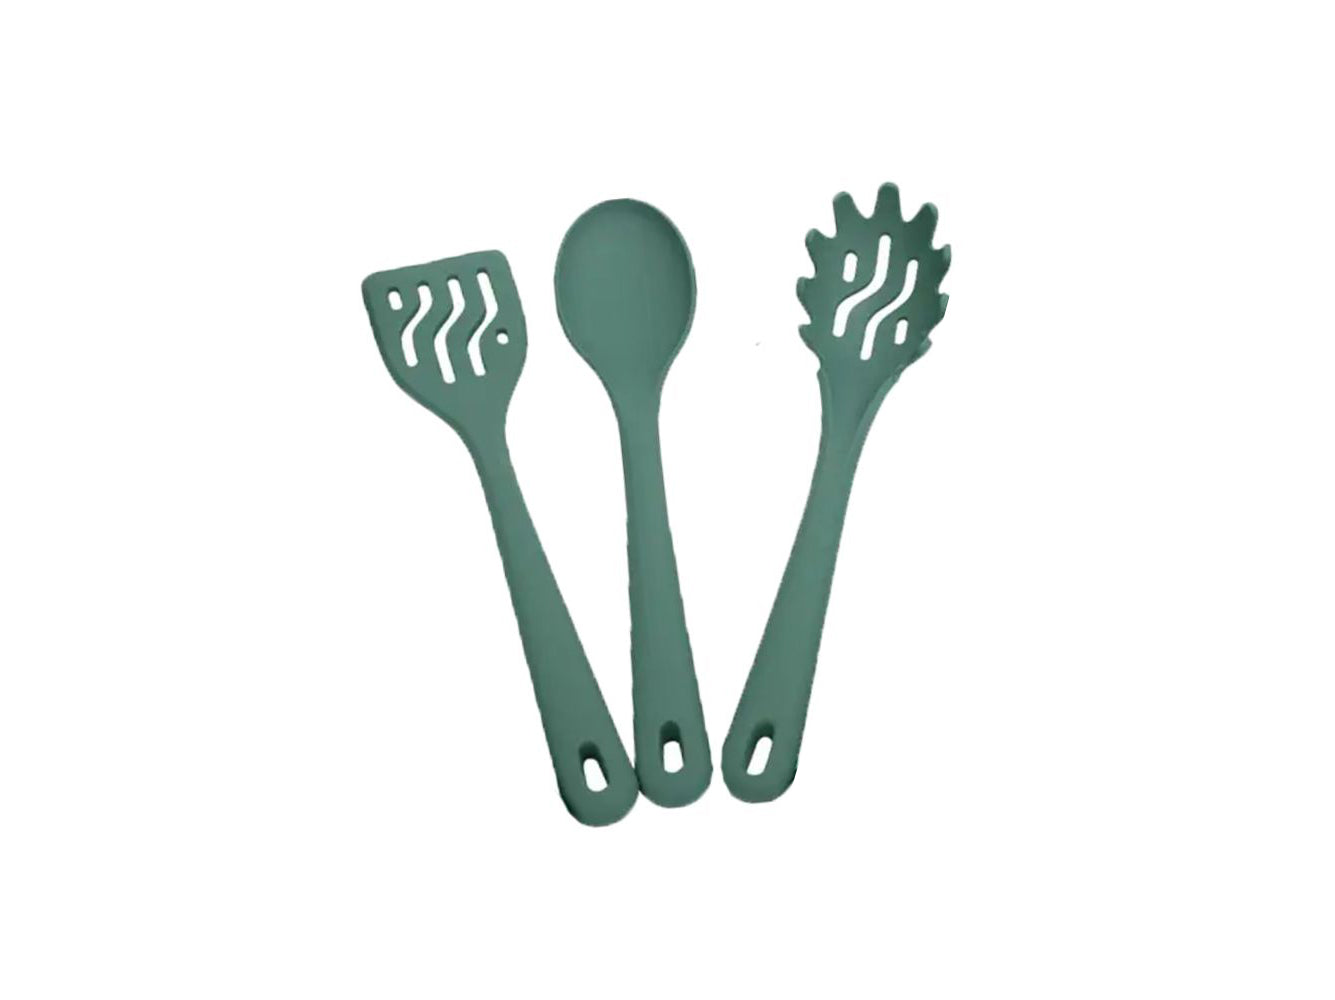 Welcome Pack - 3 Piece Utensil Set